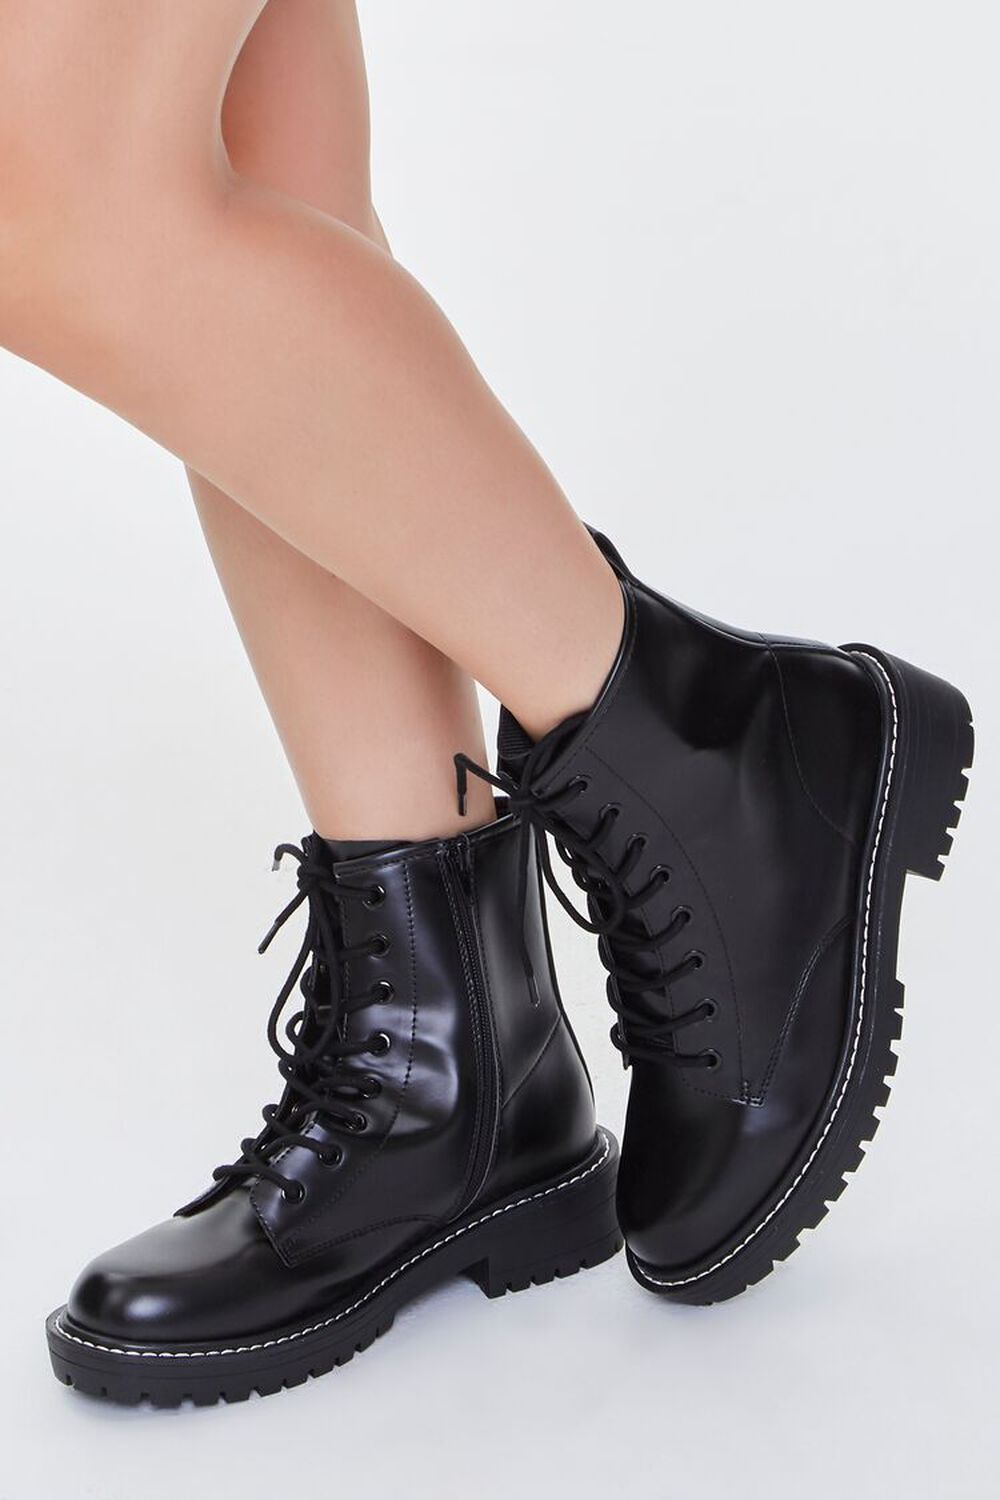 BLACK Faux Leather Ankle Boots (Wide), image 1